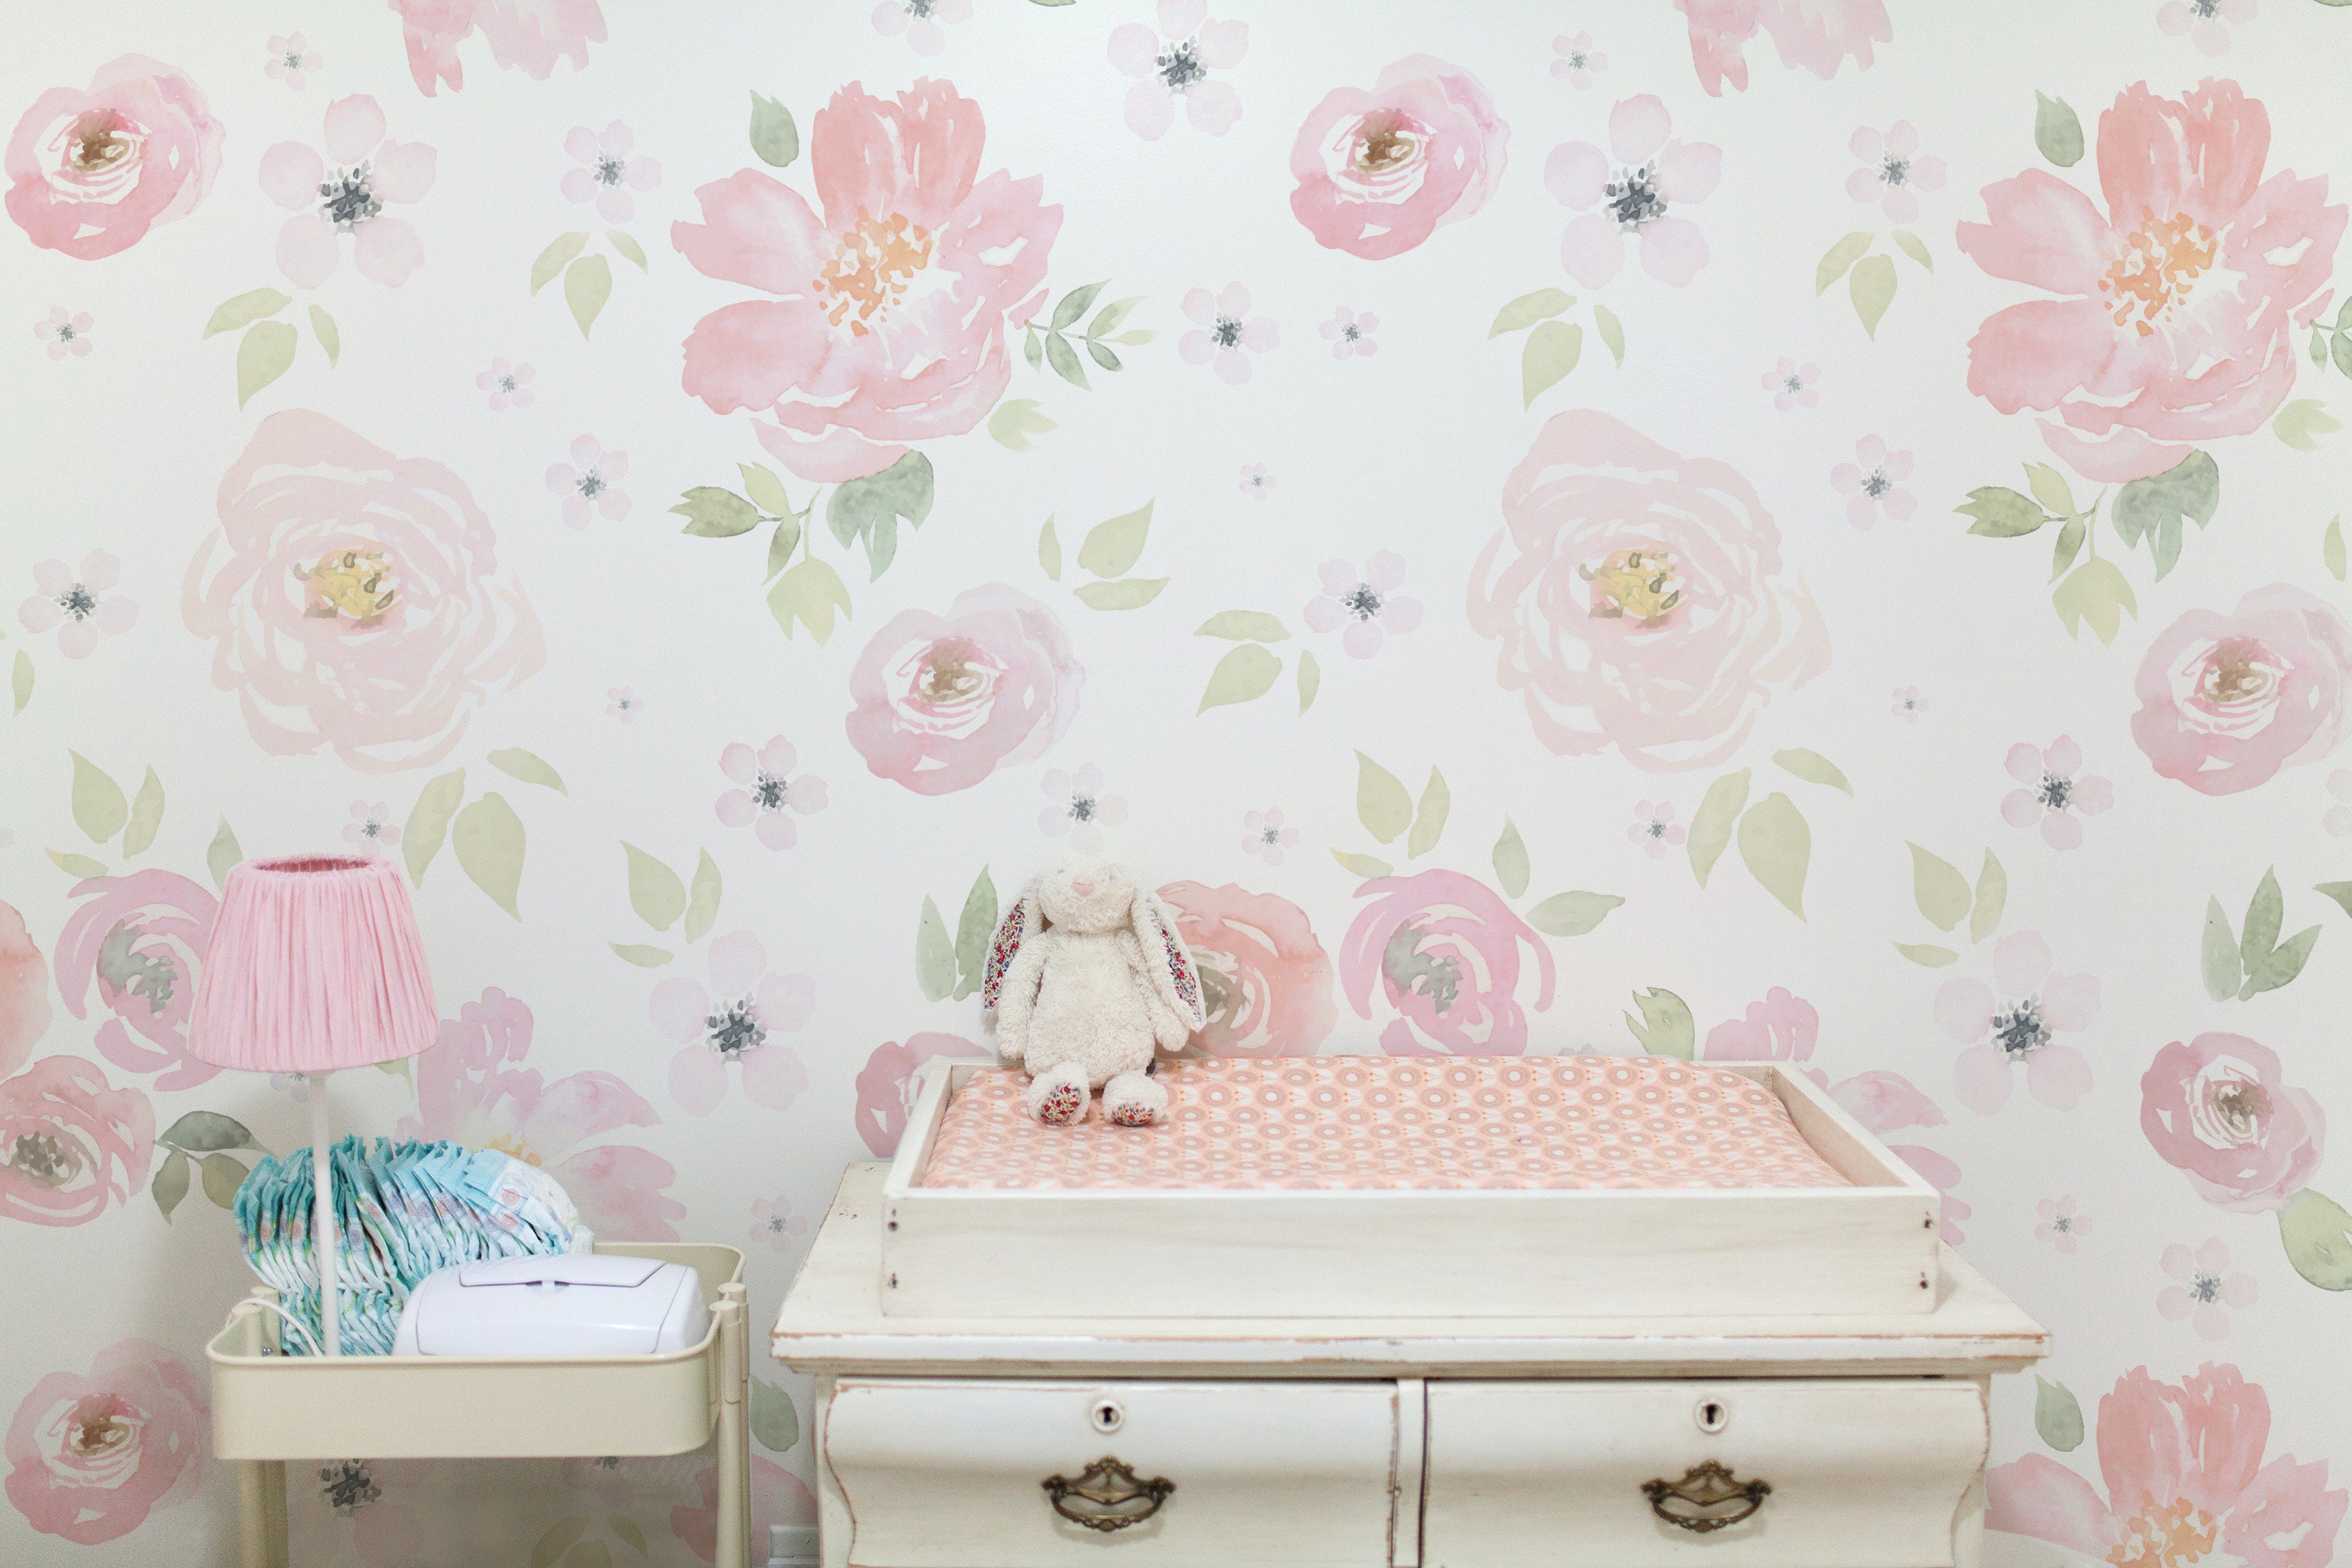 A charming nursery scene with a vintage white changing table adorned with a plush toy bunny, under a wall covered in 'Gentle Blossom Wallpaper' featuring large watercolor flowers in soft pink and green tones, creating a soothing and whimsical atmosphere.